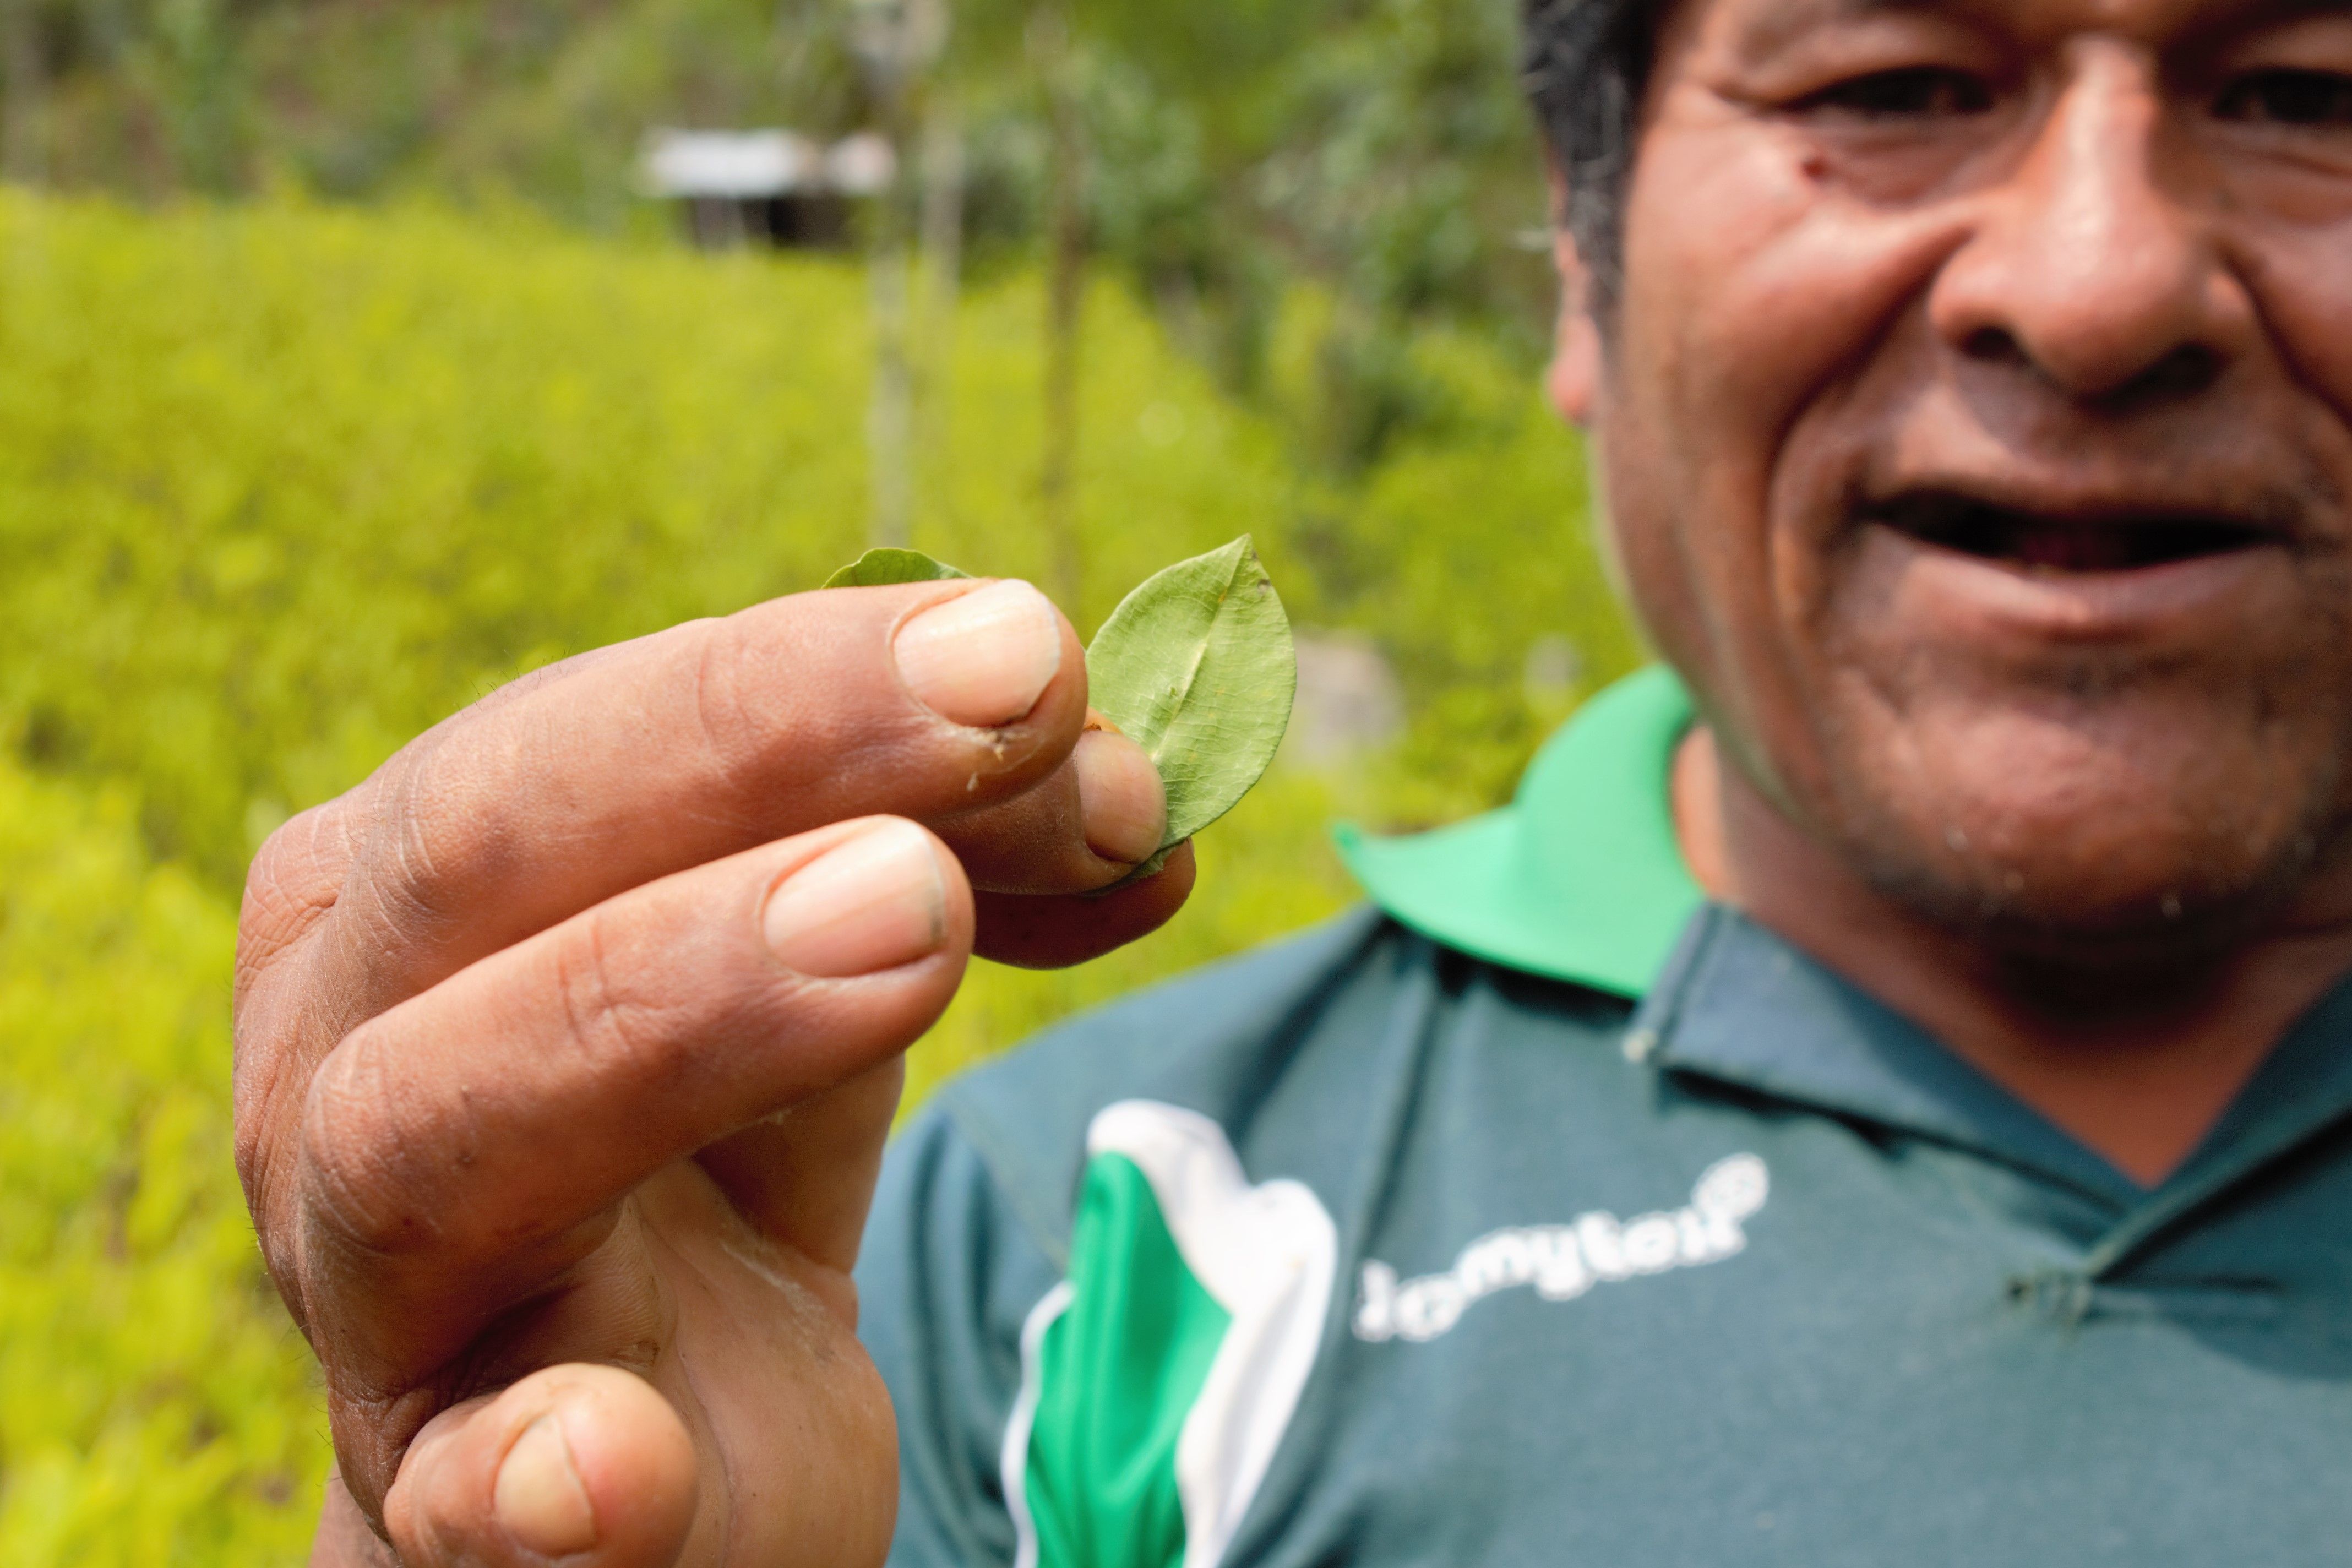 Don Mario, coca grower, is showing coca leaves he grew. His coca crops are entirely organic. Image by Alice Campaignolle. Bolivia, 2019.